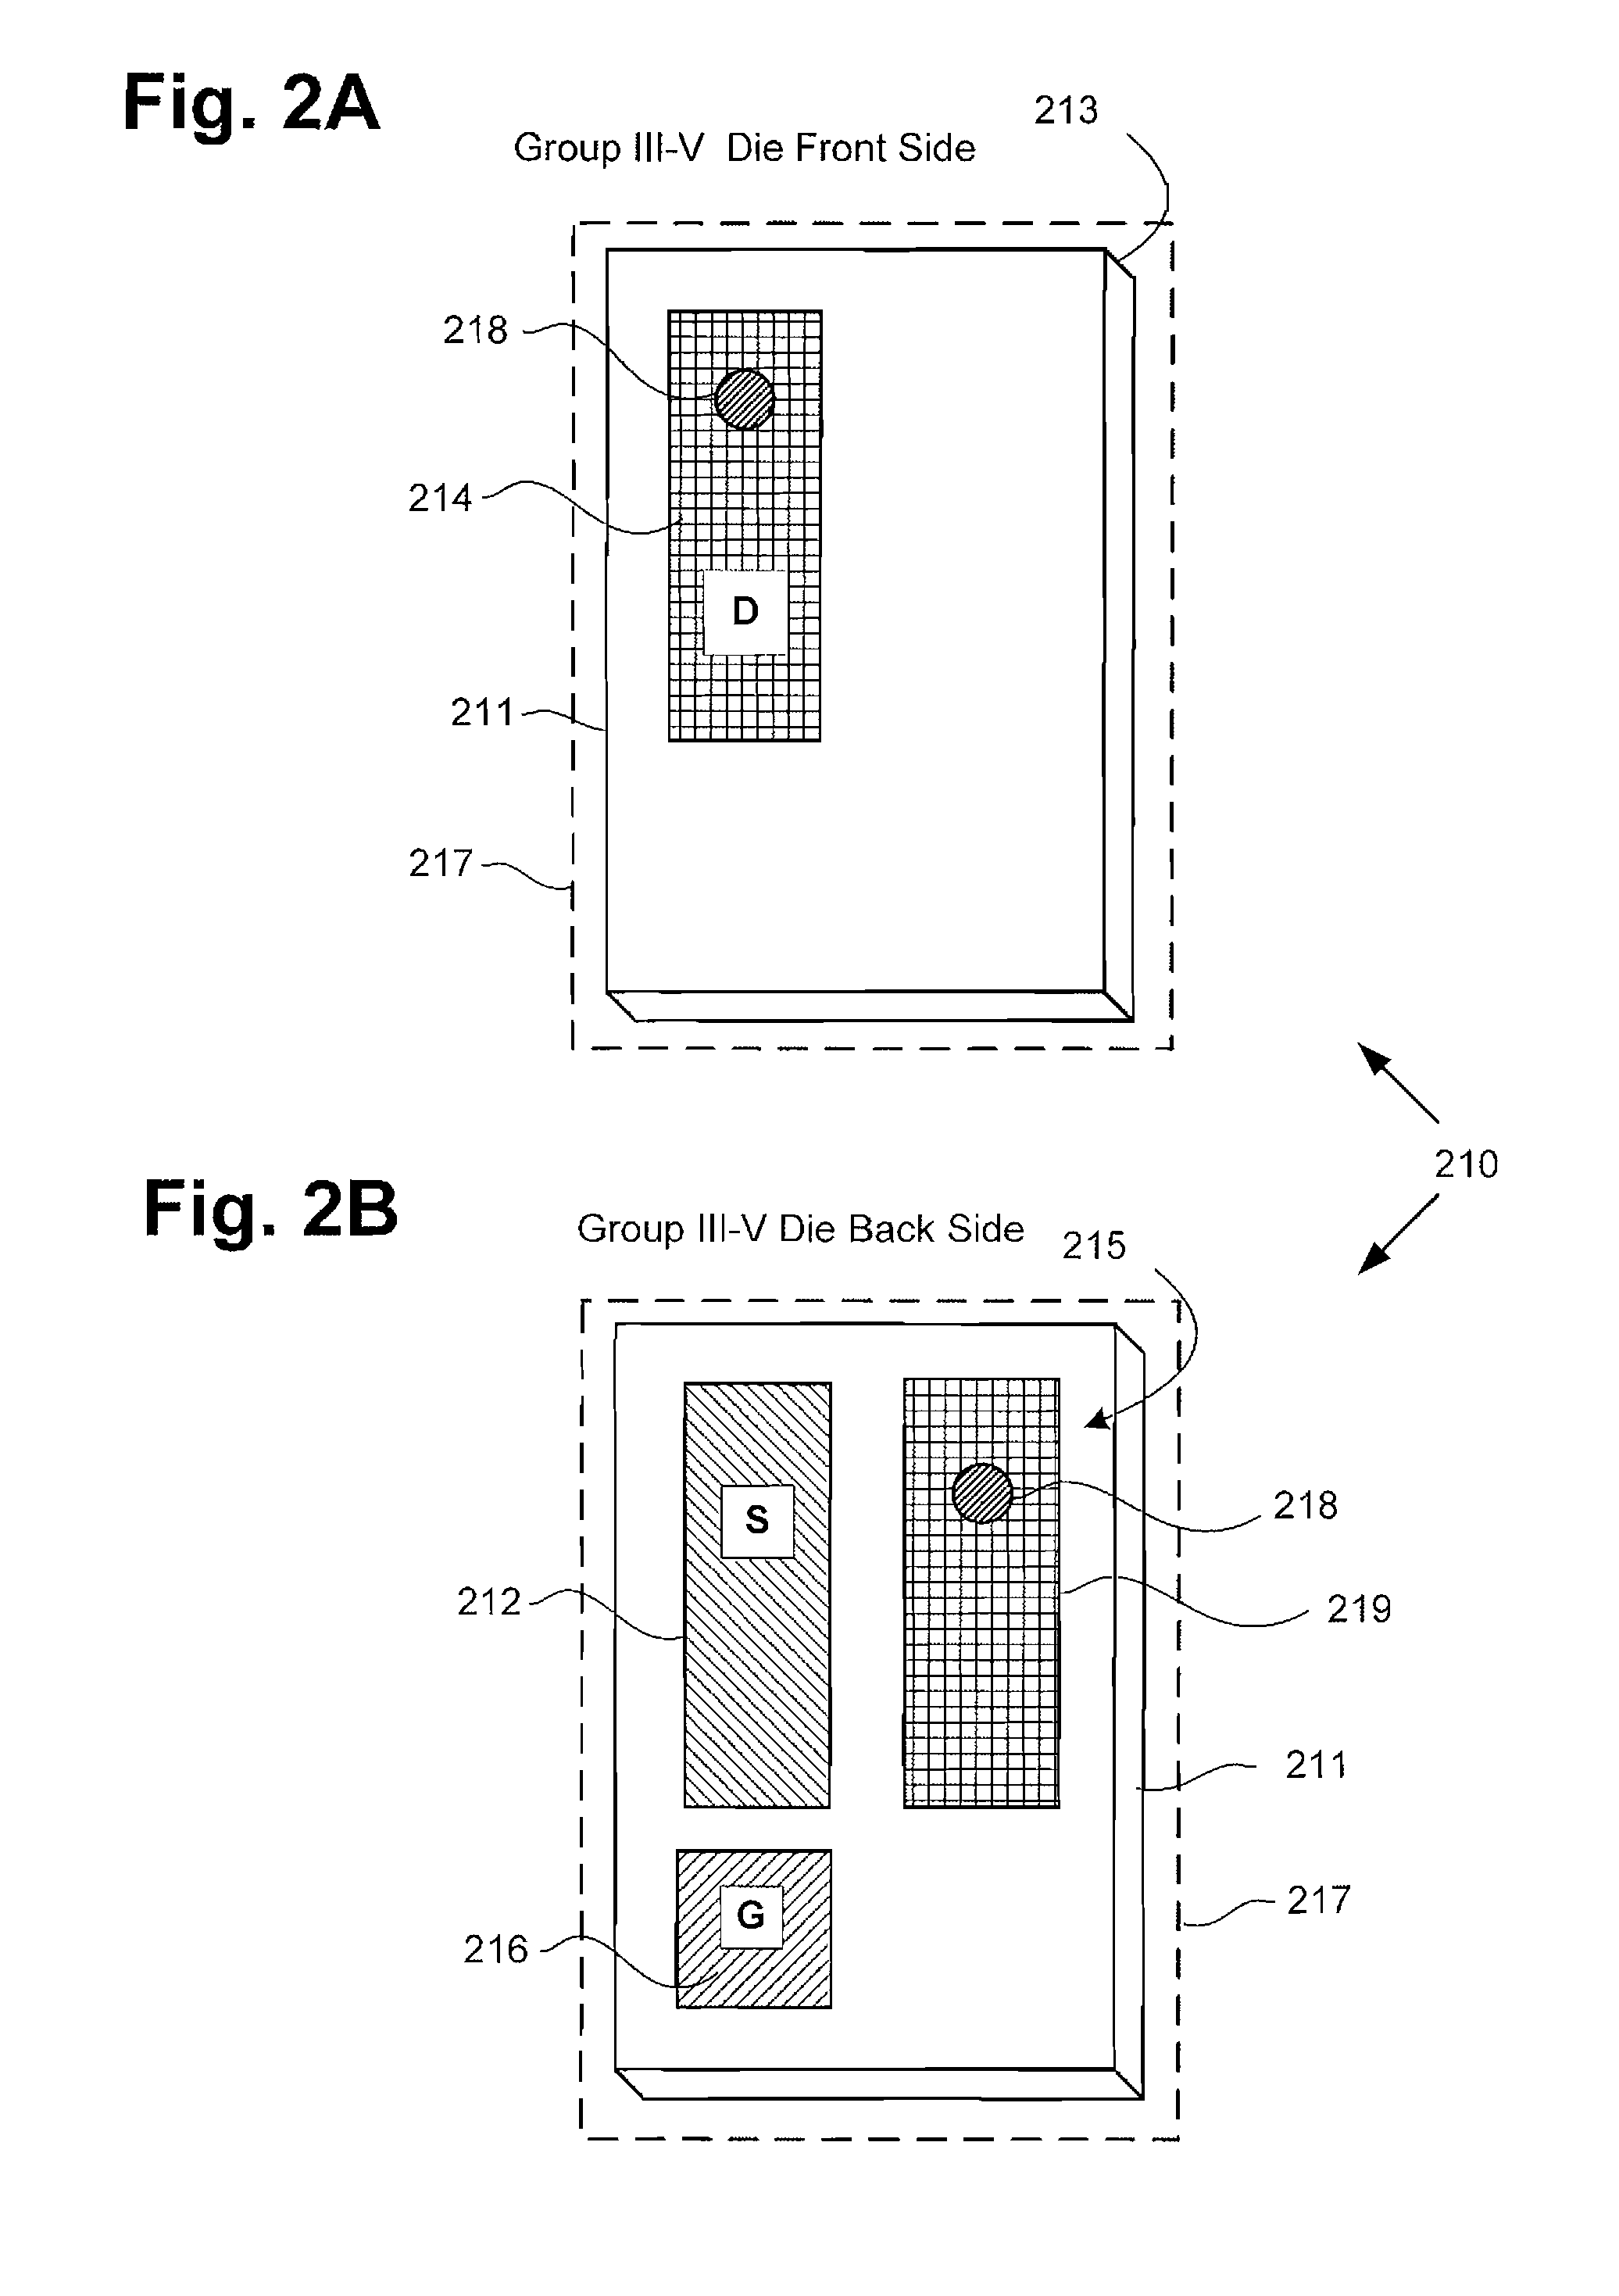 Stacked Composite Device Including a Group III-V Transistor and a Group IV Vertical Transistor